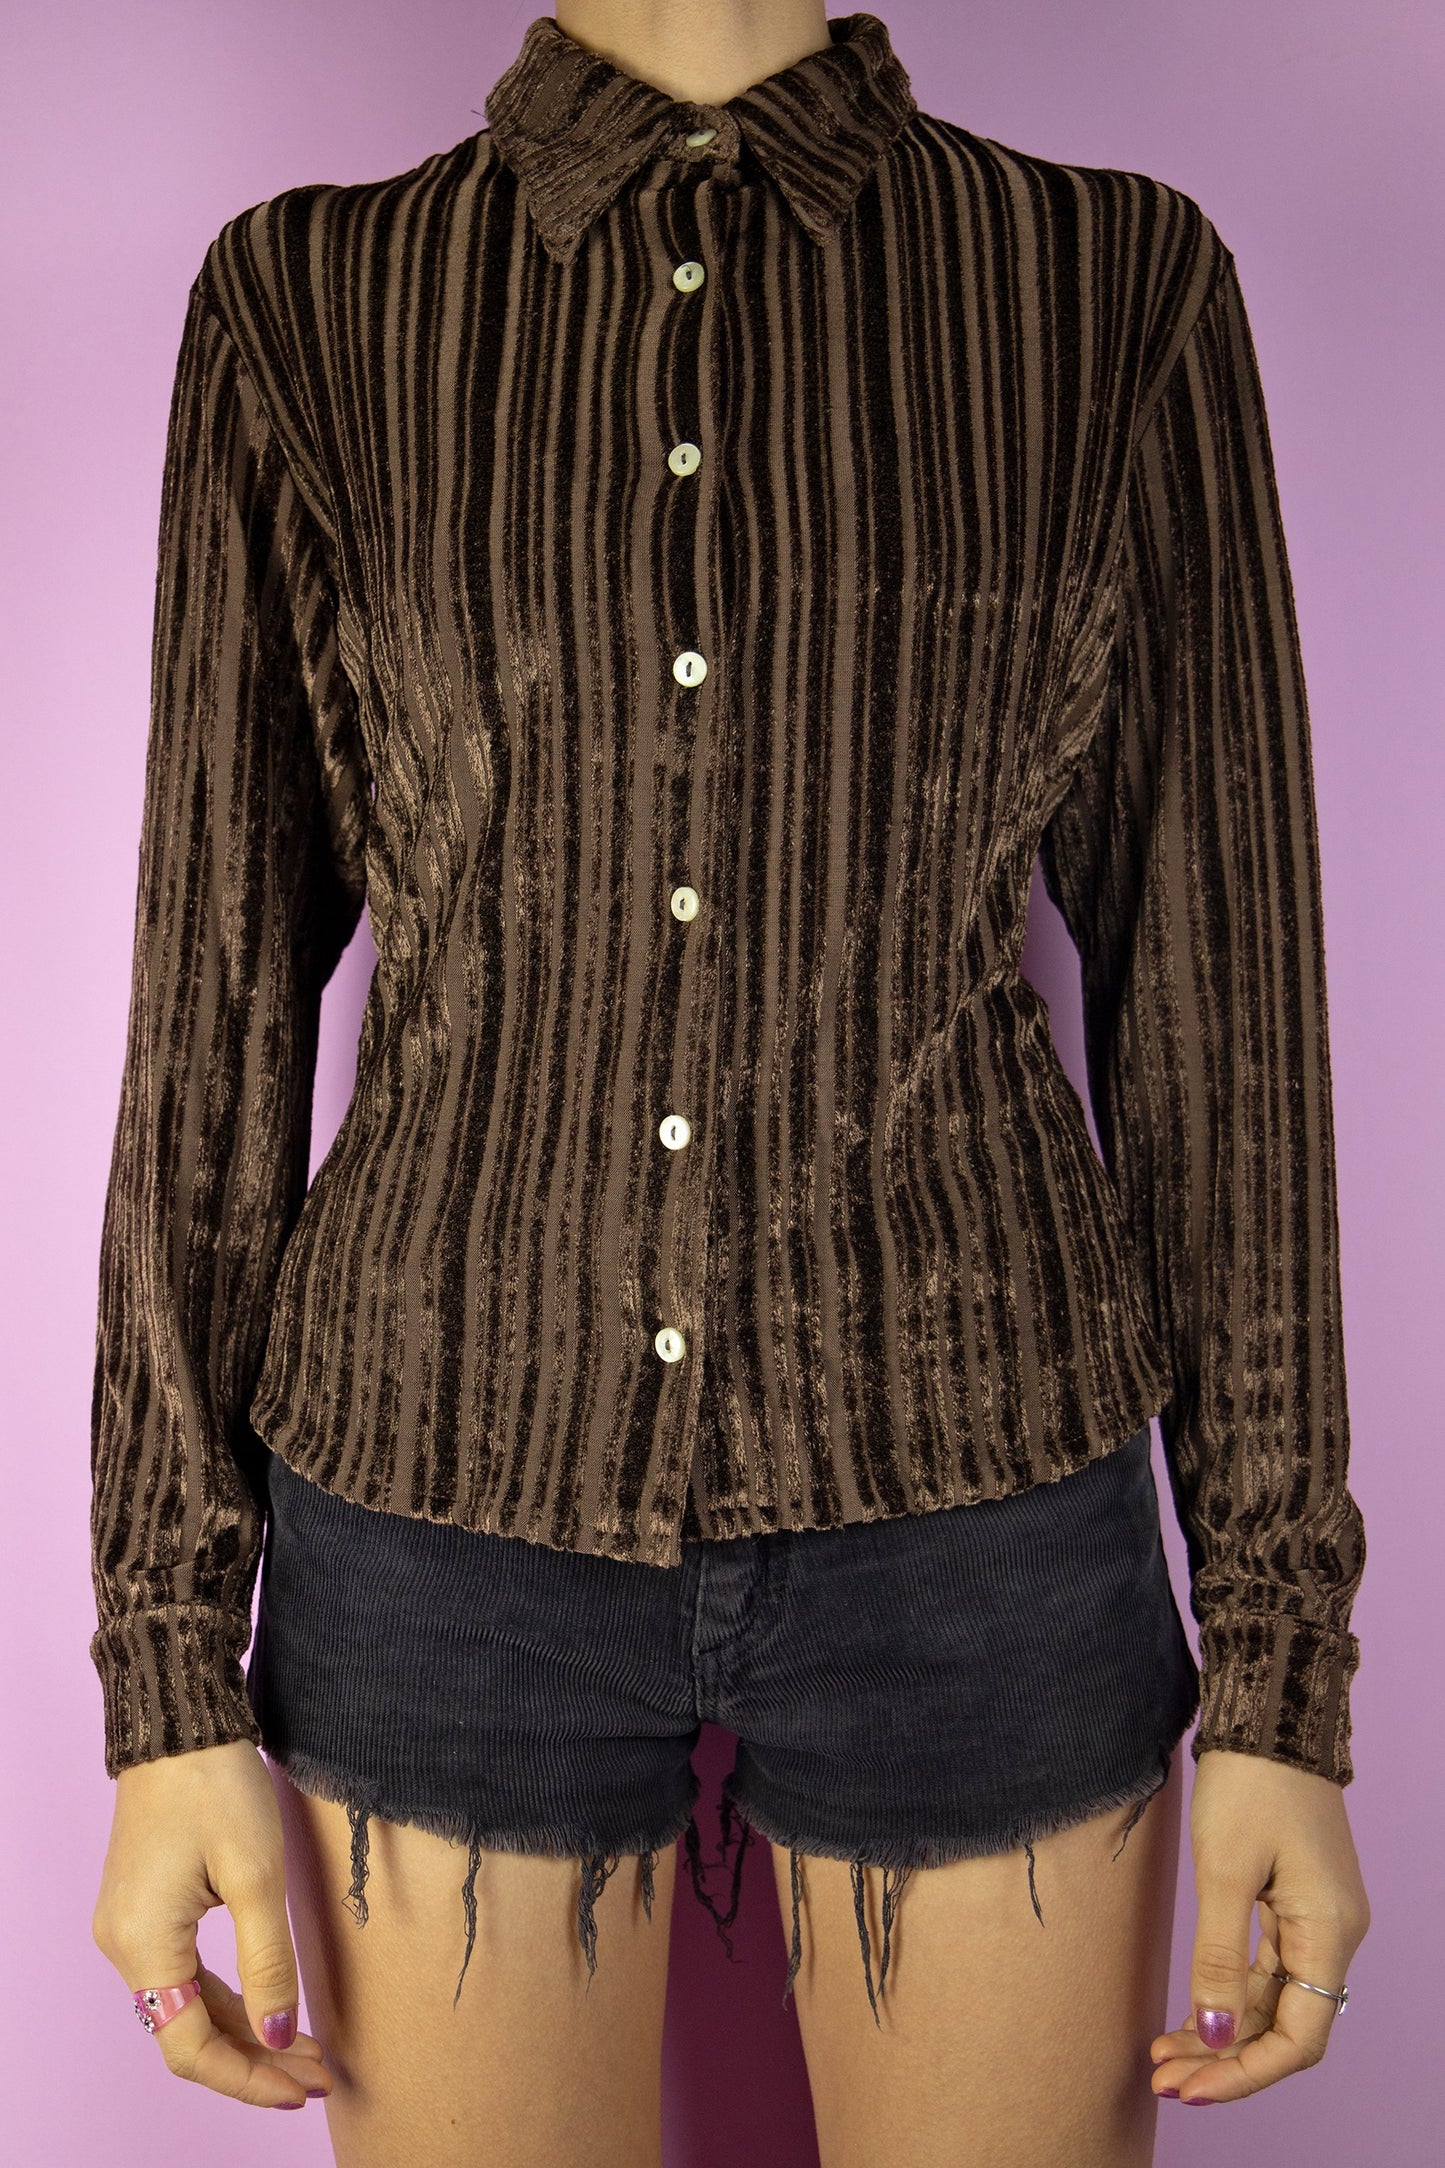 The Vintage 90's Brown Velvet Shirt is a striped stretch dark brown velvet top. This cute boho grunge dark academia blouse is from the 1990s.